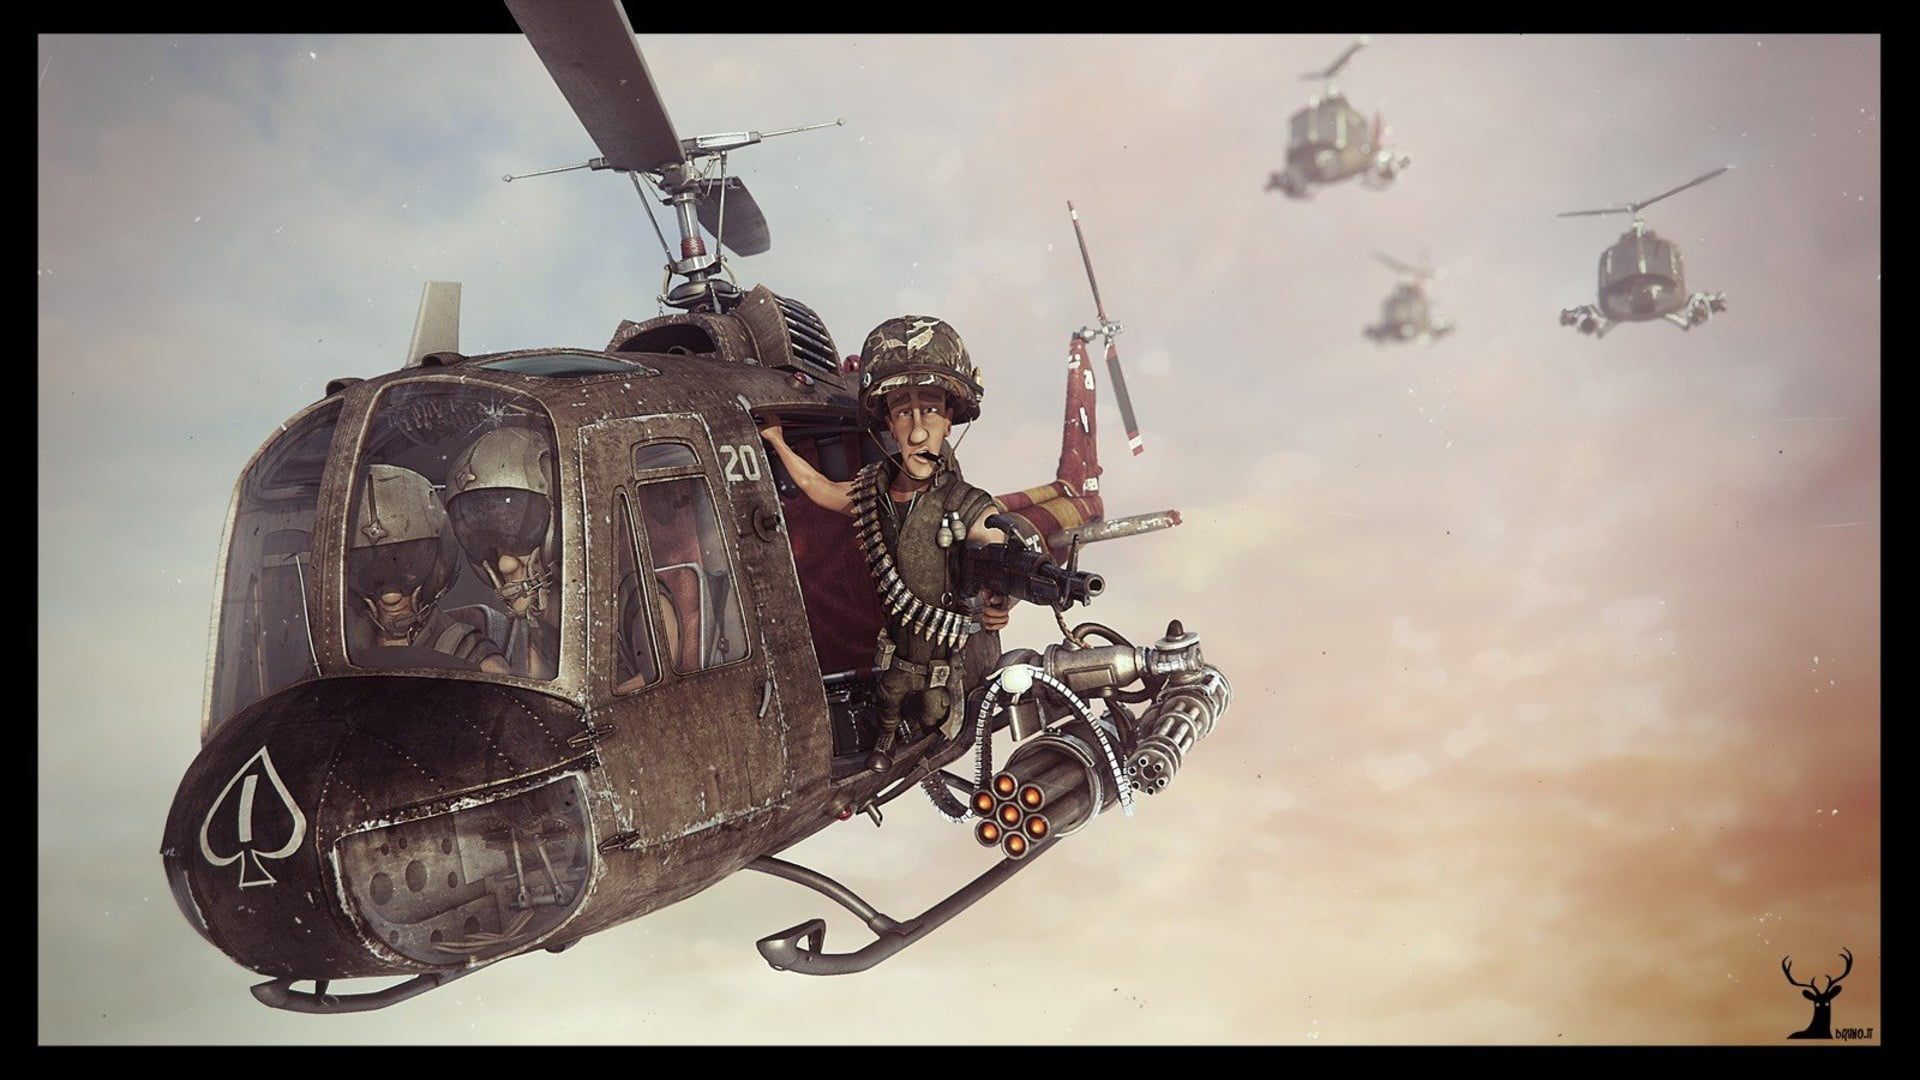 weapons, flight, helicopter, the trick, American, art, Bell